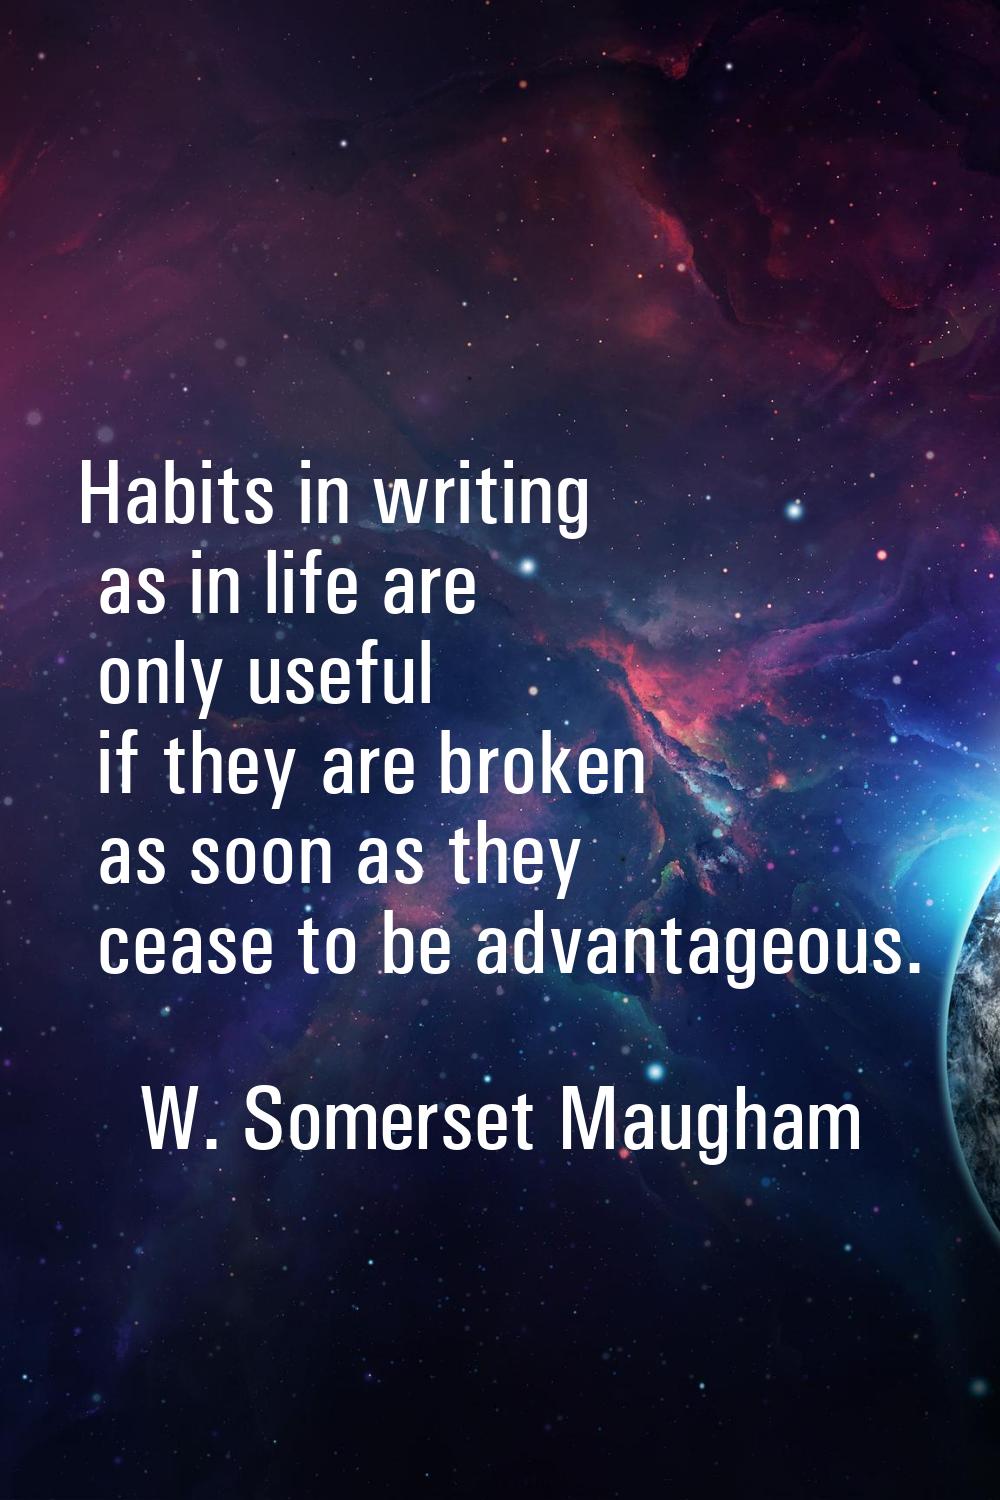 Habits in writing as in life are only useful if they are broken as soon as they cease to be advanta